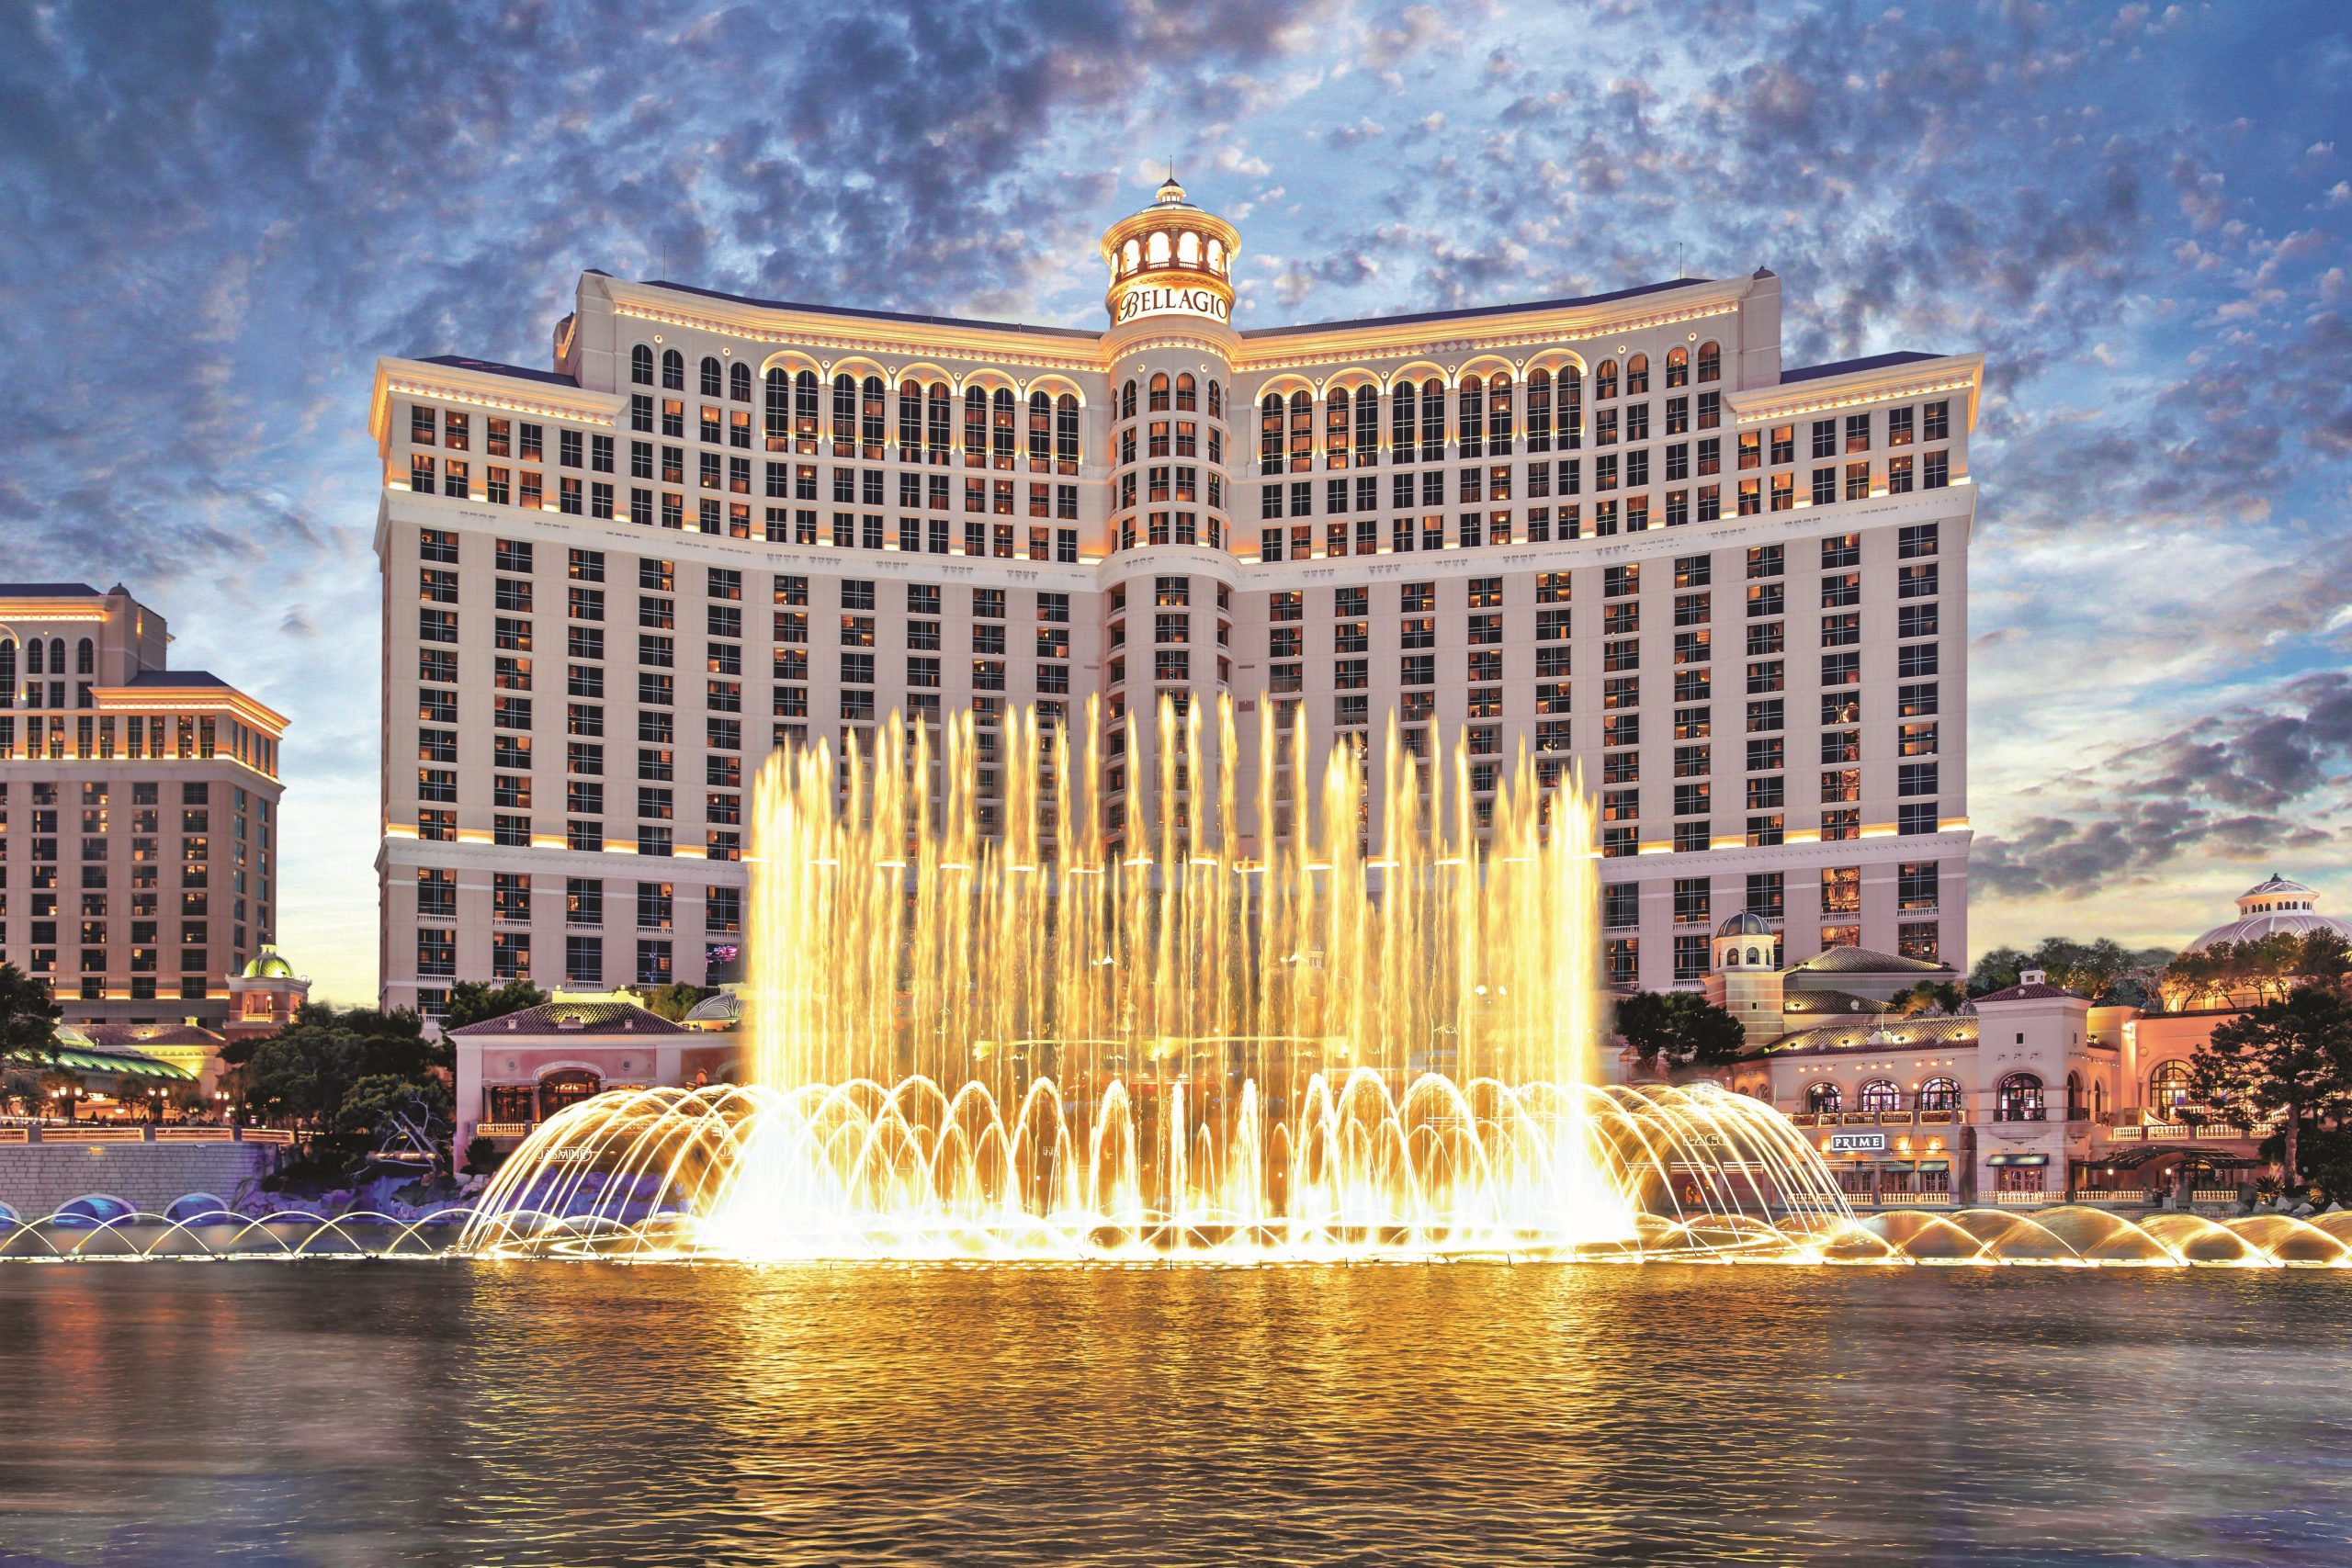 See Bellagio's New Display and Resorts World Overflows with Applications